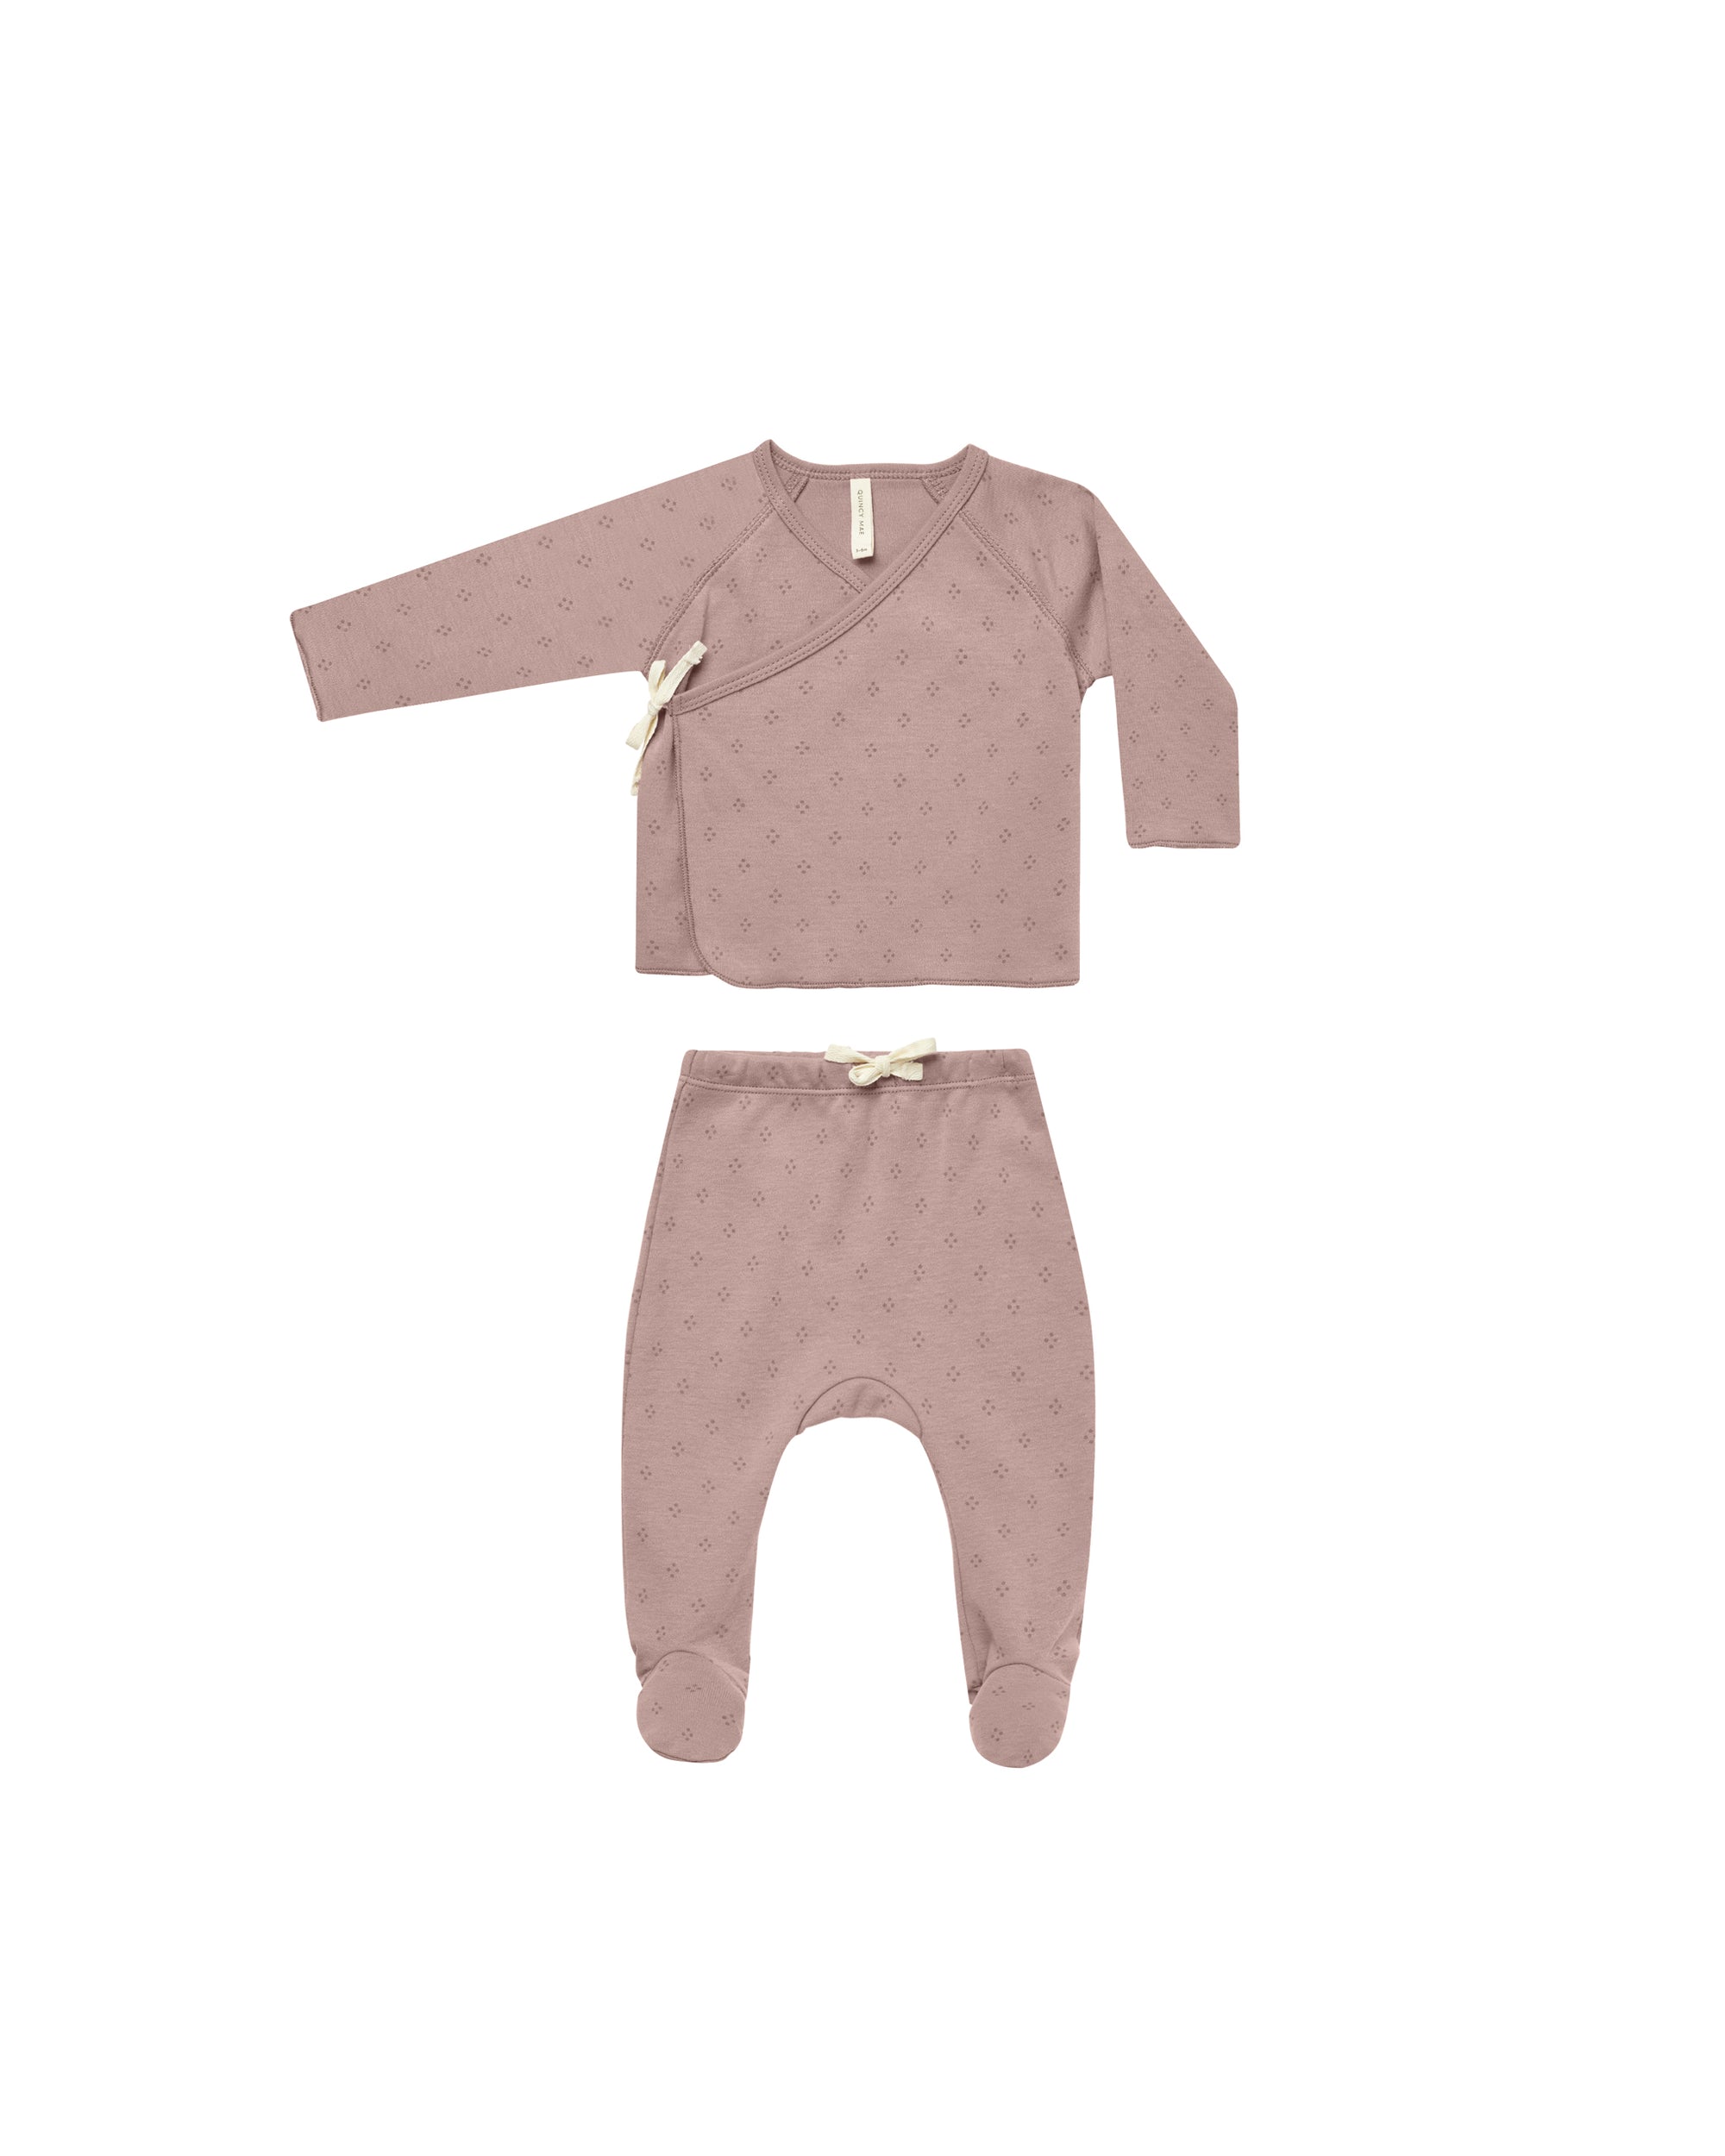 Wrap Top + Footed Pant Set | Dotty